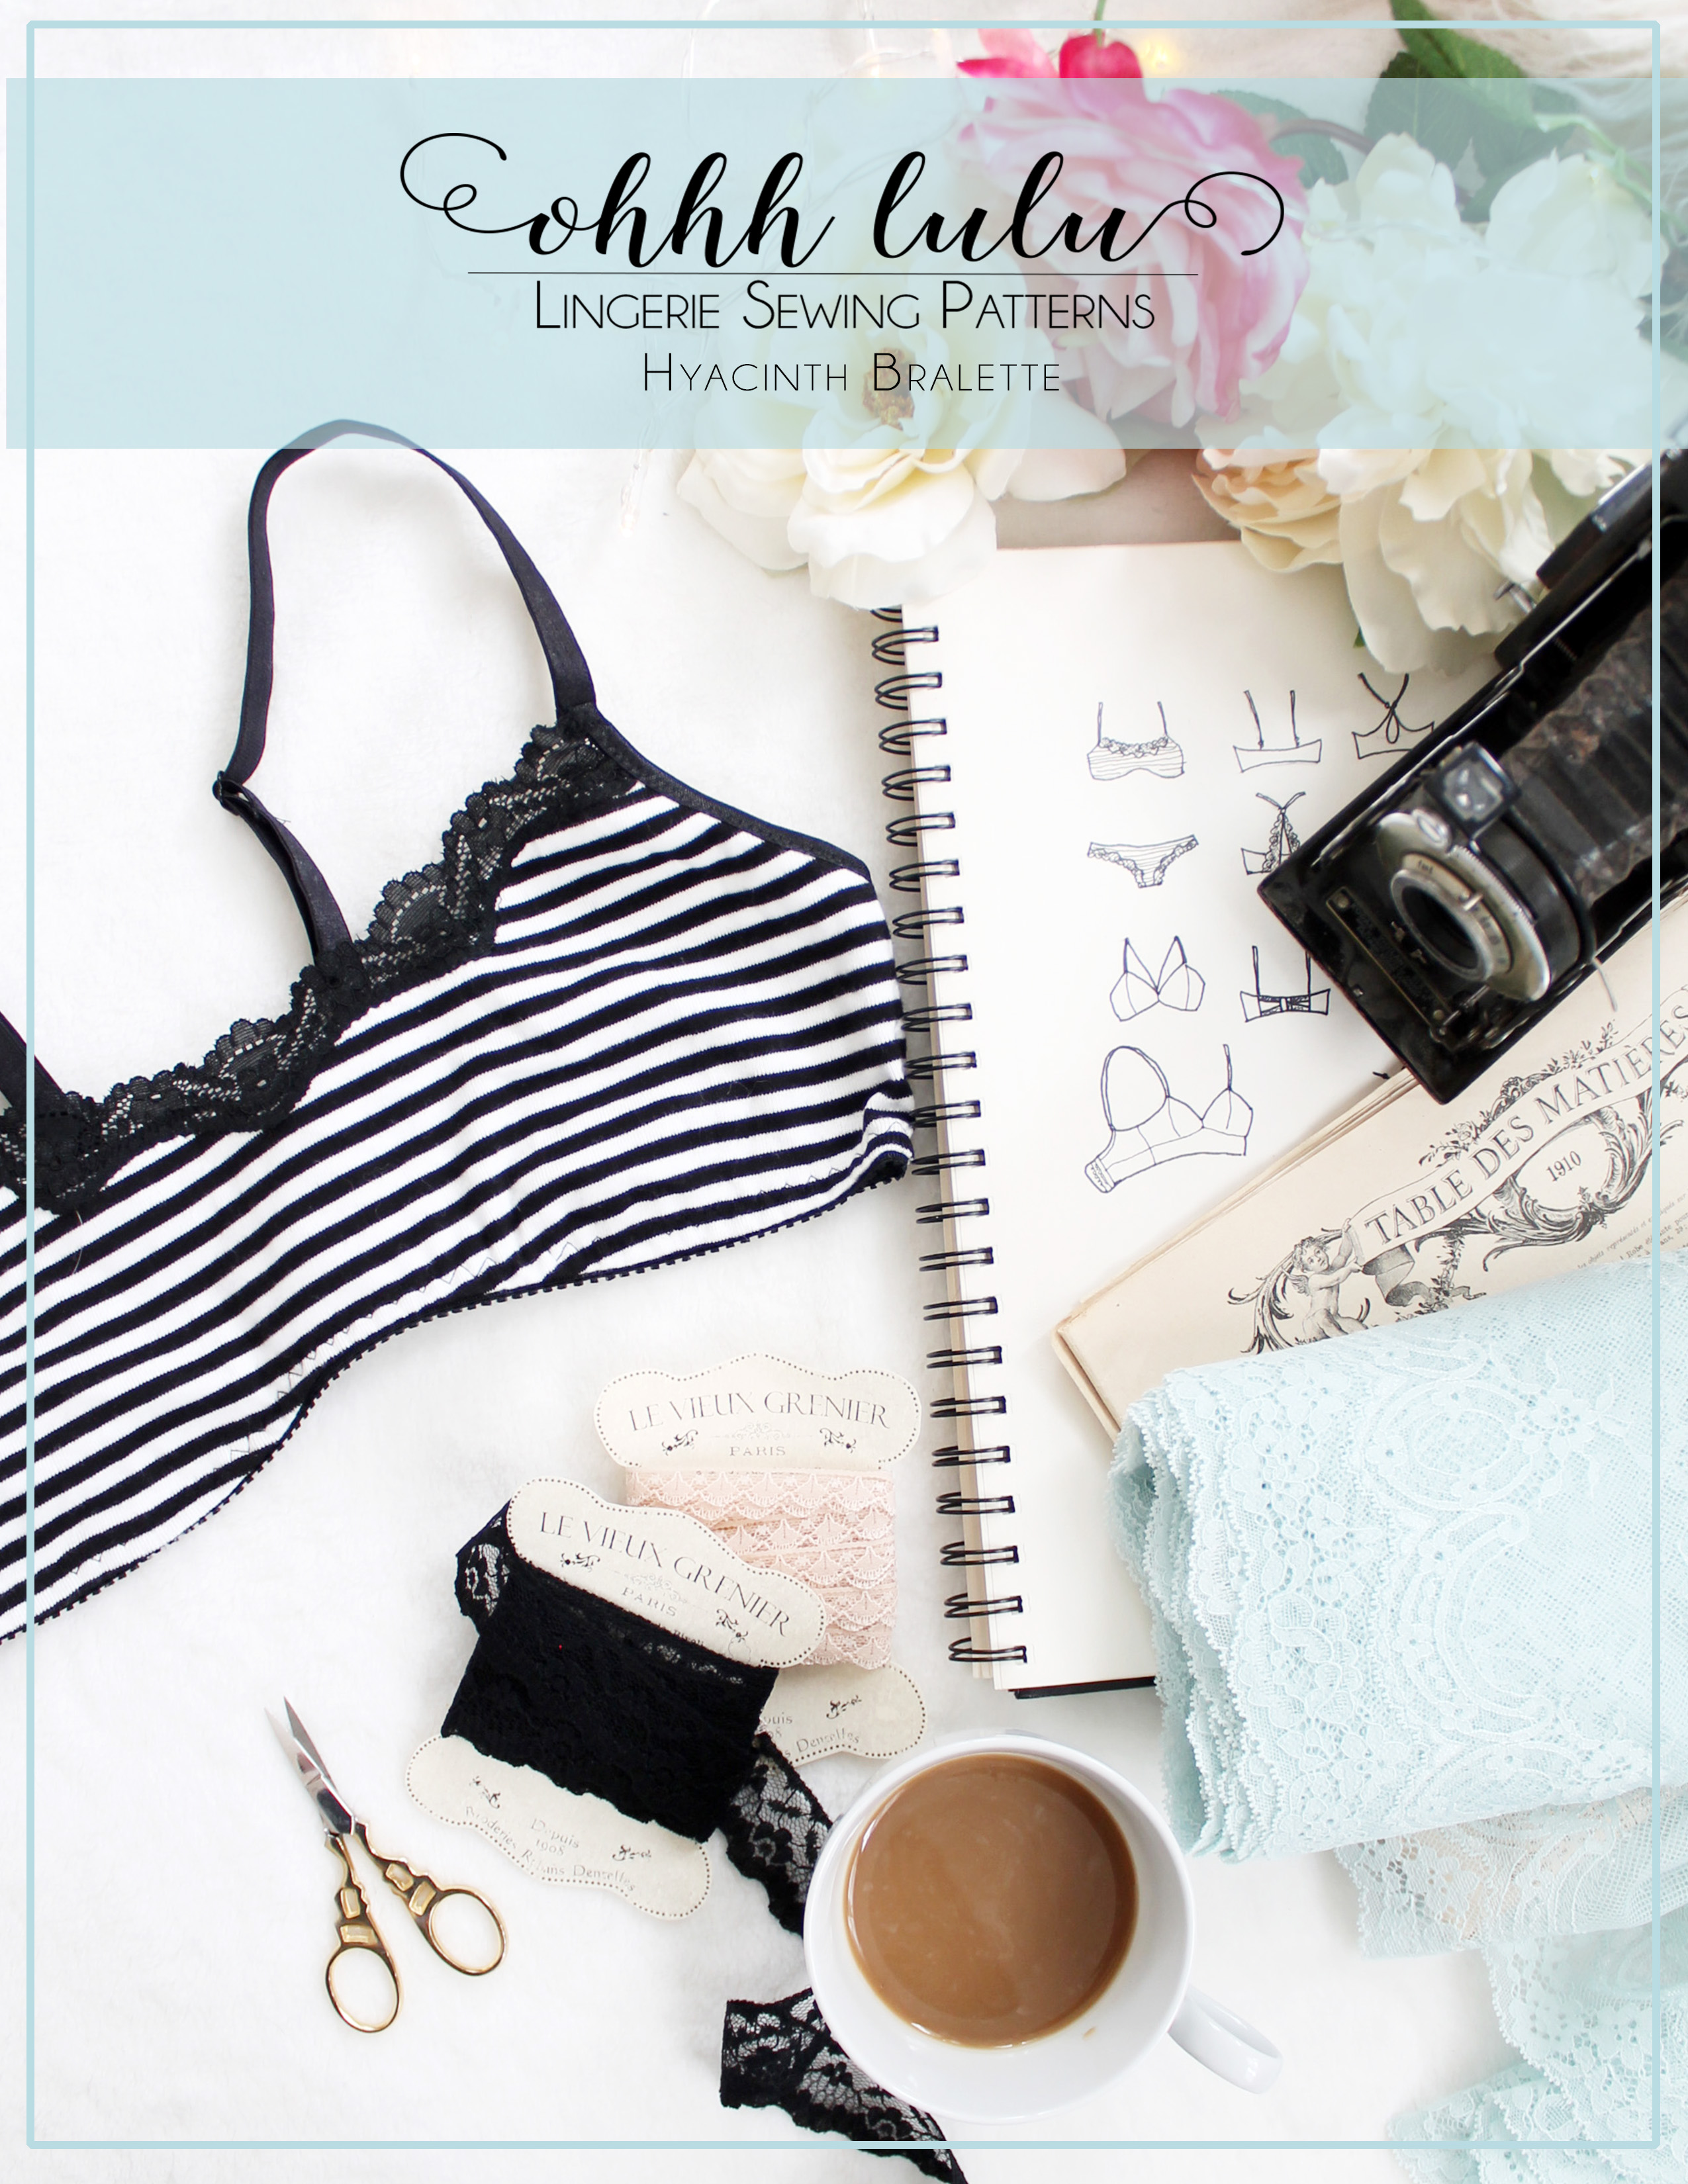 The June Bralette - Free Sewing Pattern